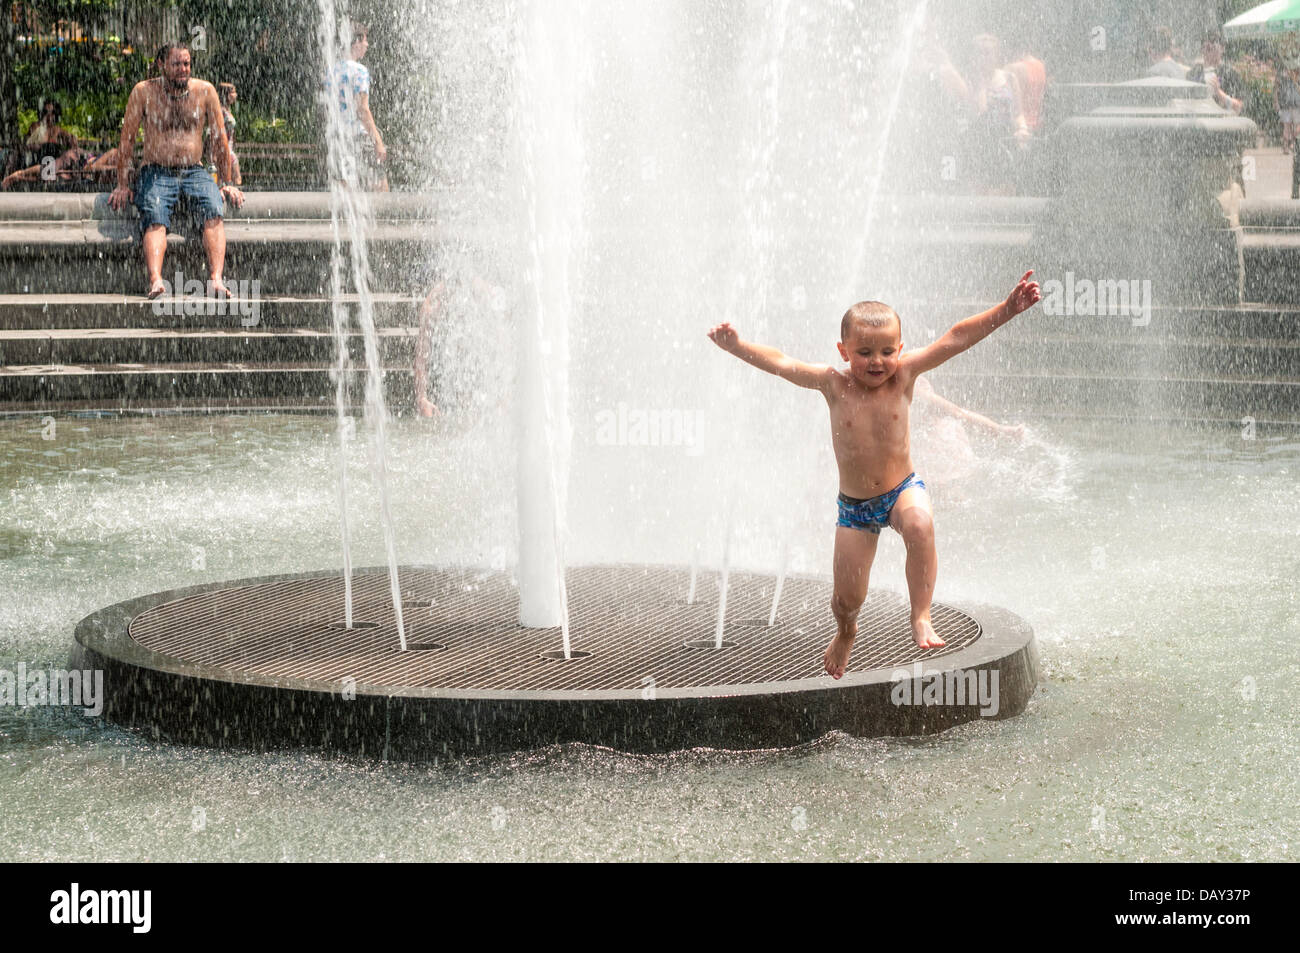 New York, NY 20 July  2013 - Summer heatwave, where temperatures have exceeded 90º farenheit, ( 33º Centigrade ) for the past week, a young boy frolics in the fountain in Washington Square Park.   On Thursday, electricity usage fell just short of an all-time high - 13,161 megawatts were used by 5 p.m., just 28 megawats fewer than a record set on July 22, 2011, Con Edison said, which lead to power outages on Staten Island. City officials urged New Yorkers to avoid exercising outdoors, drink plenty of water and check on any elderly neighbors. Stock Photo